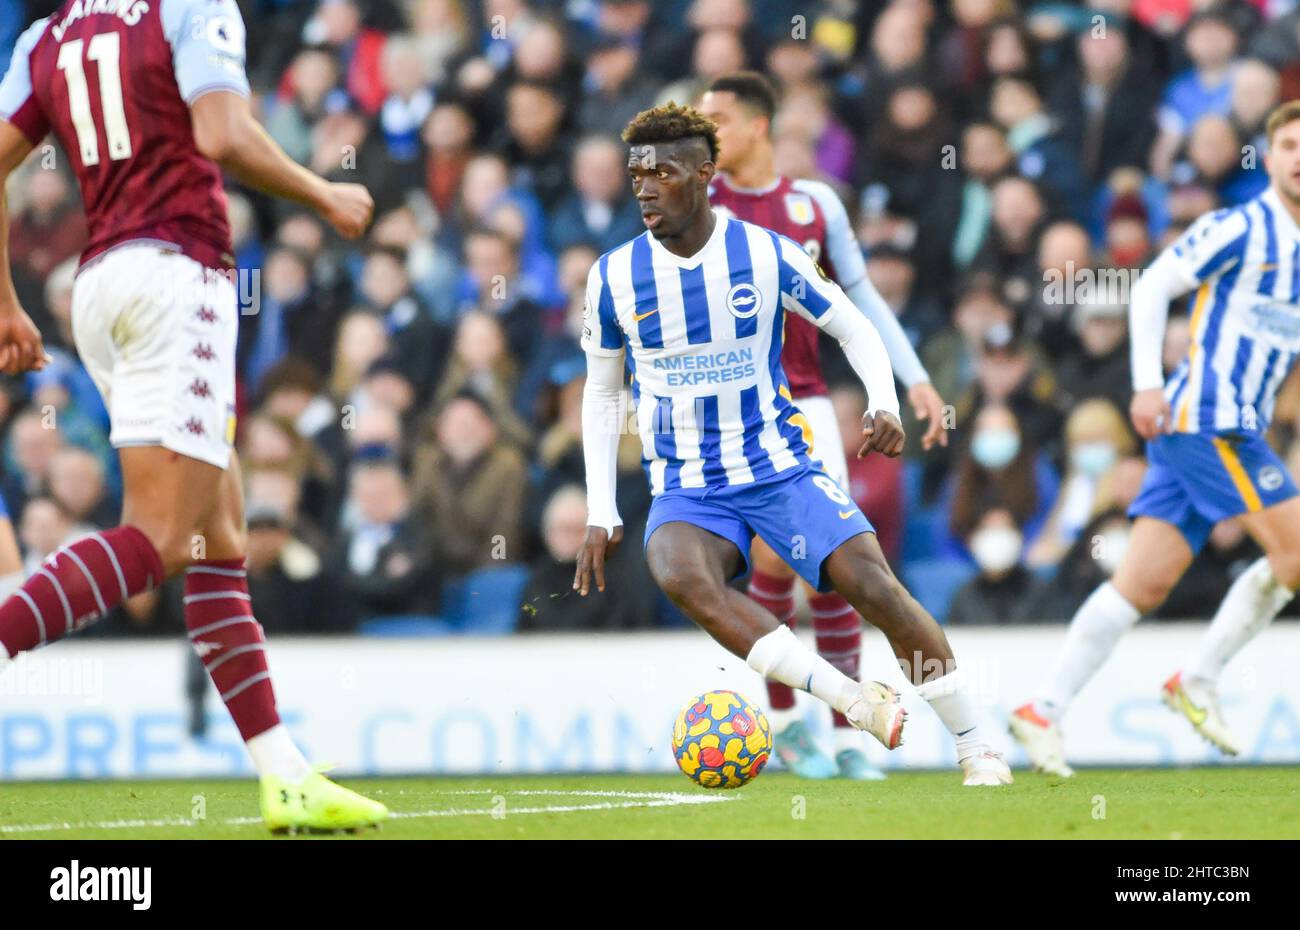 Yves Bissouma of Brighton on the ball during the Premier League match between Brighton and Hove Albion and Aston Villa at the American Express Stadium  , Brighton , UK - 26th February 2022 - Photo Simon Dack/Telephoto Images. Editorial use only. No merchandising. For Football images FA and Premier League restrictions apply inc. no internet/mobile usage without FAPL license - for details contact Football Dataco Stock Photo